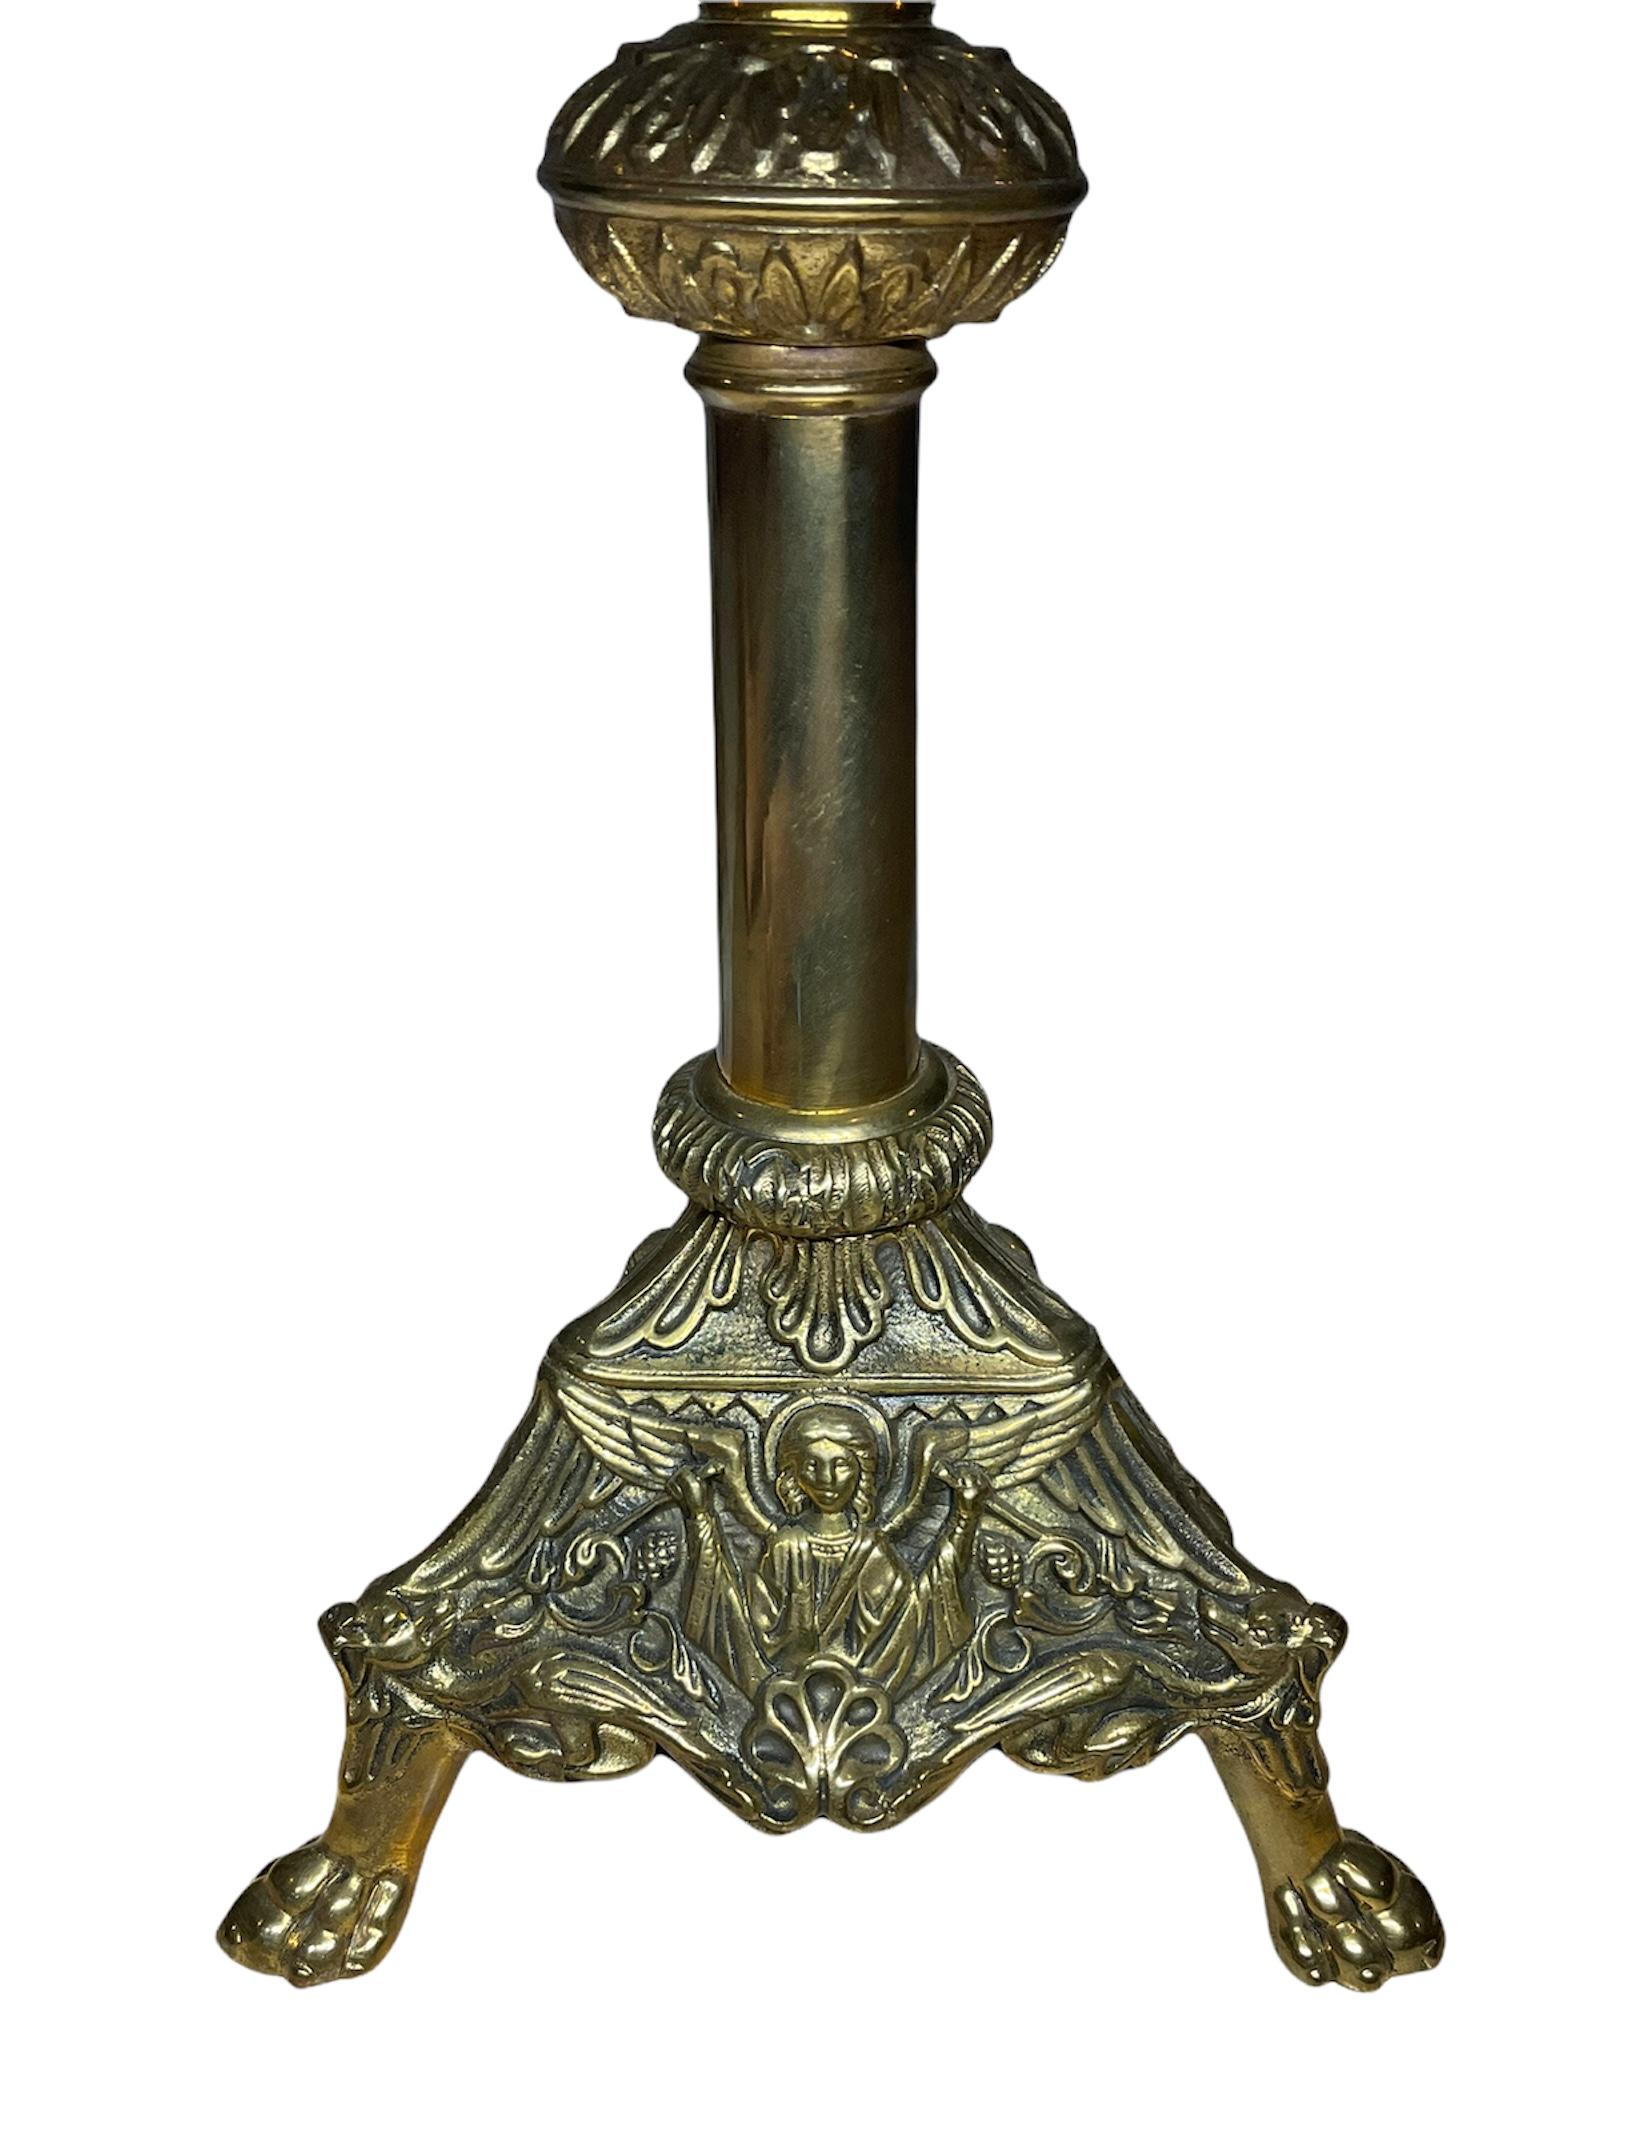 This is a pair of heavy gilt bronze church altar candle holders. They are decorated by repousse angels, bird-dogs figures and pine cones at their triangular bases. There are also some chased feathers, leaves and flower motifs adorning the candle